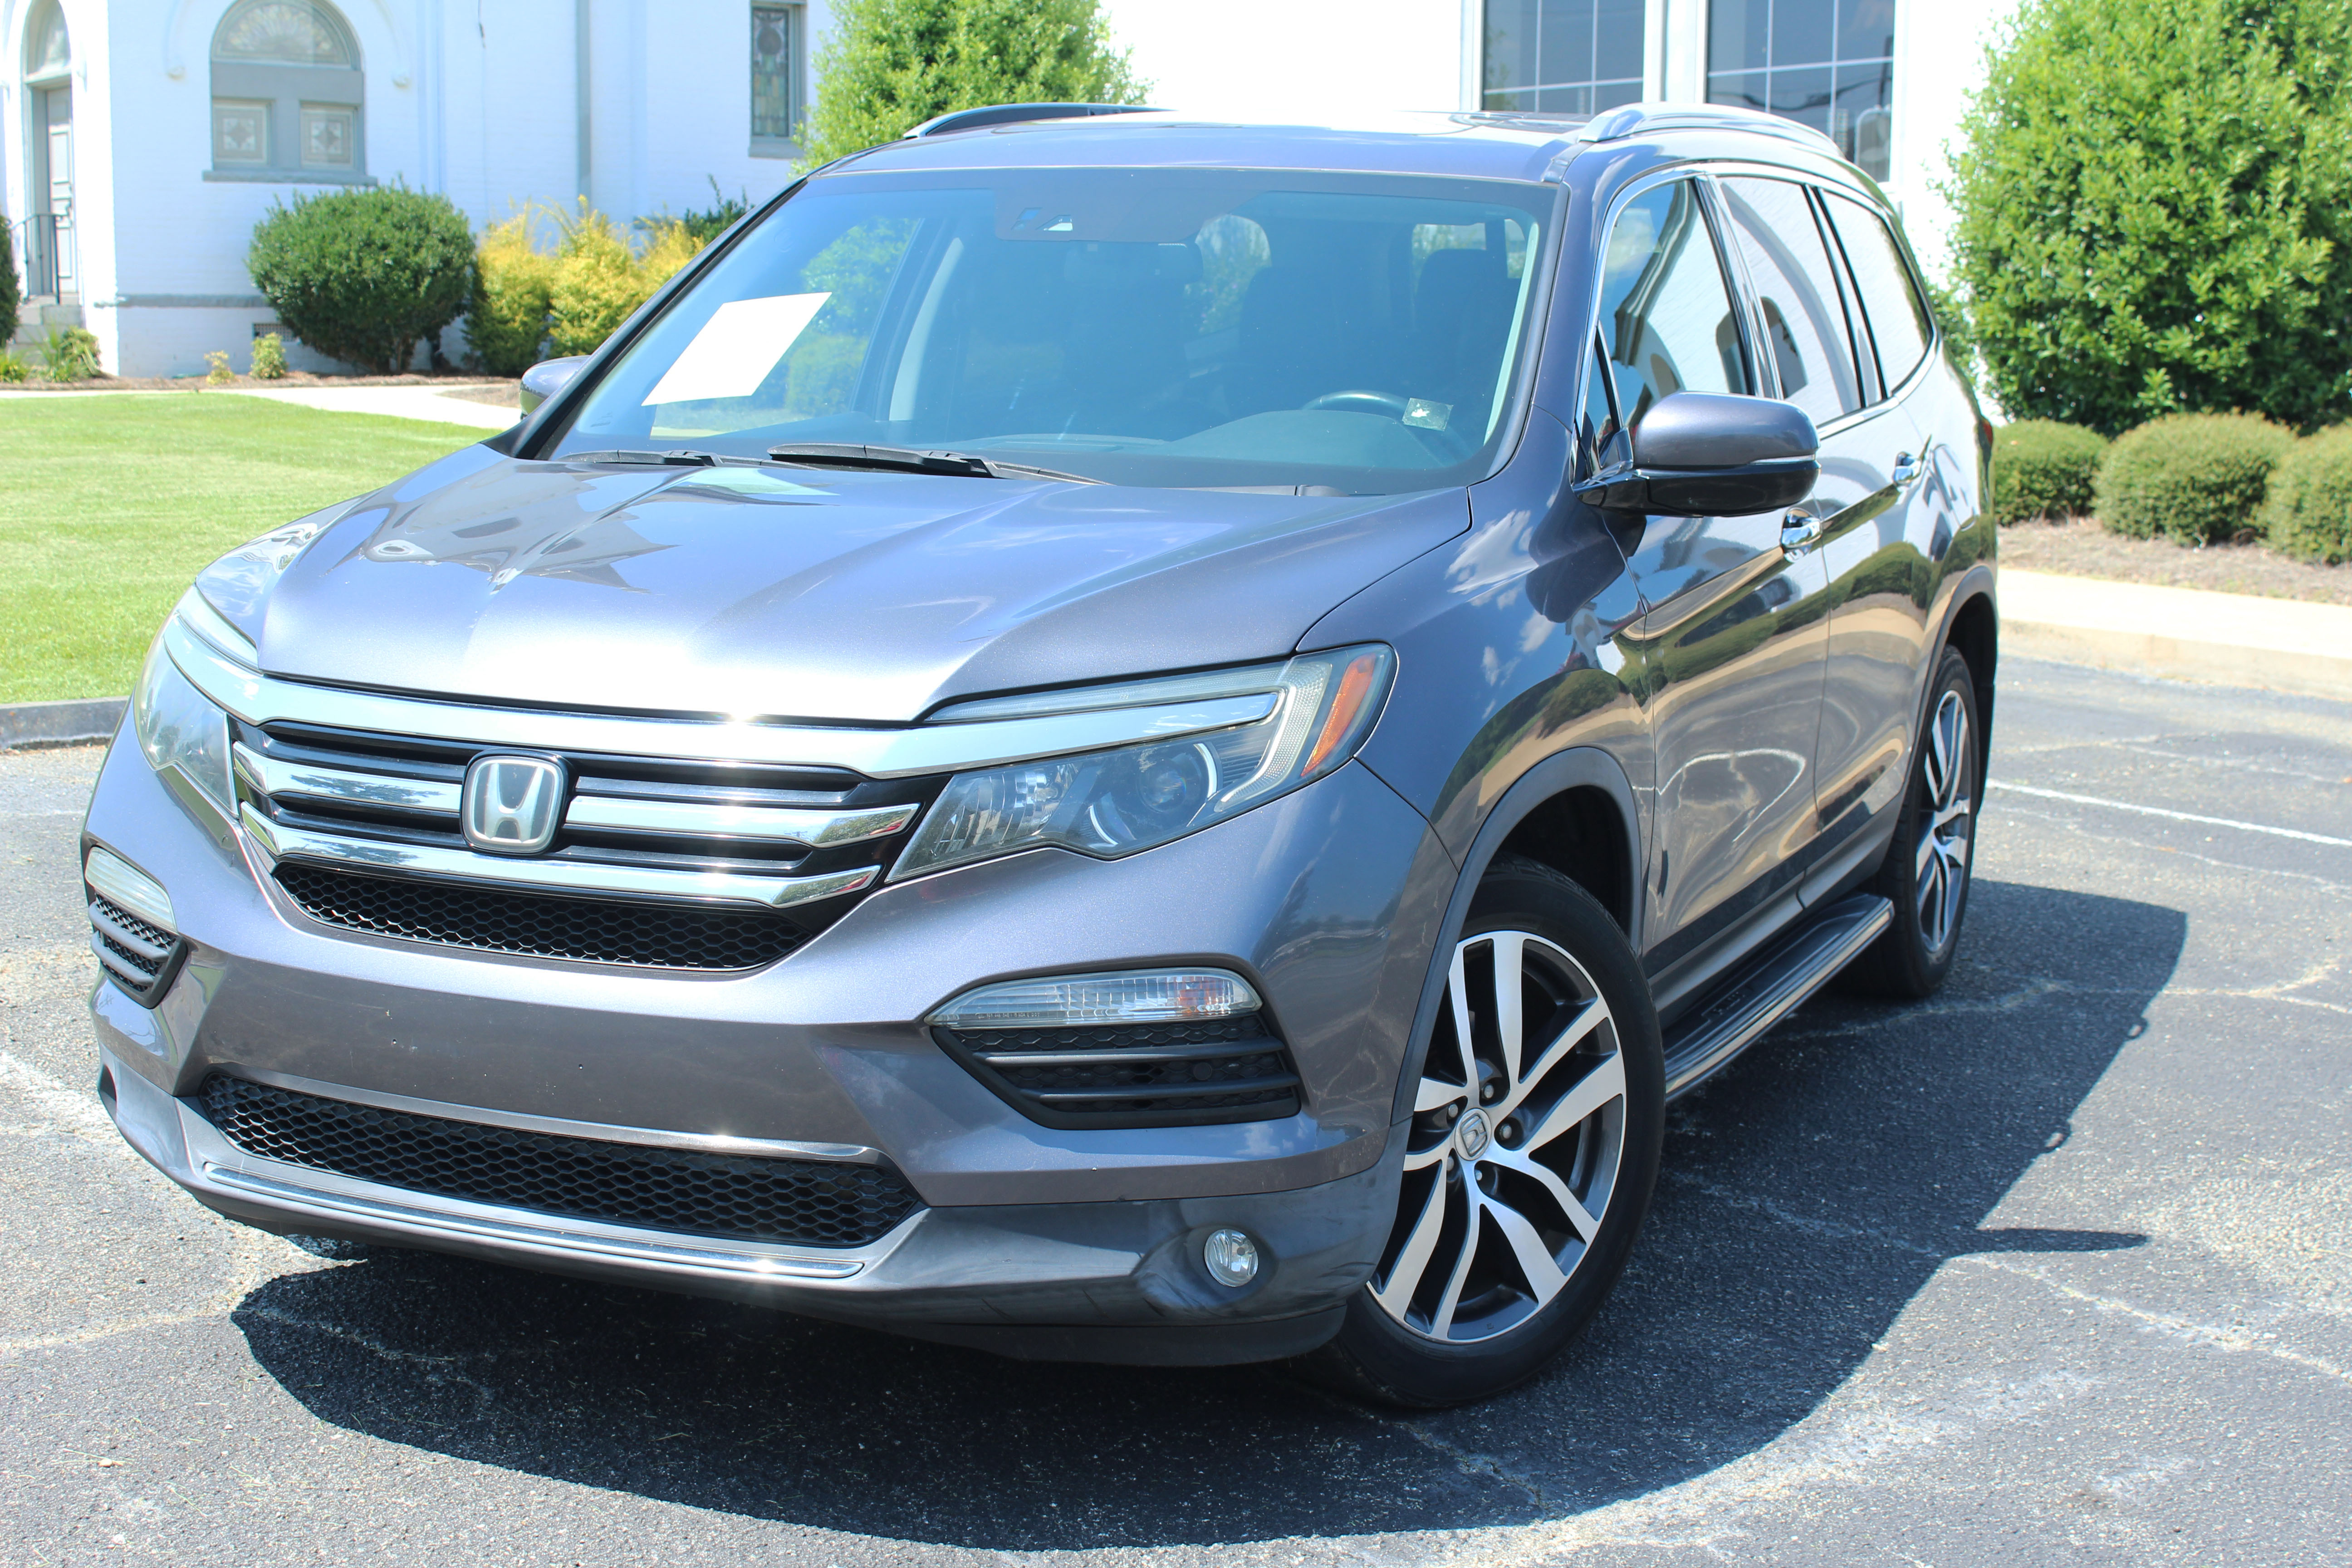 Used 2016 Honda Pilot Elite with VIN 5FNYF6H01GB072152 for sale in Blakely, GA